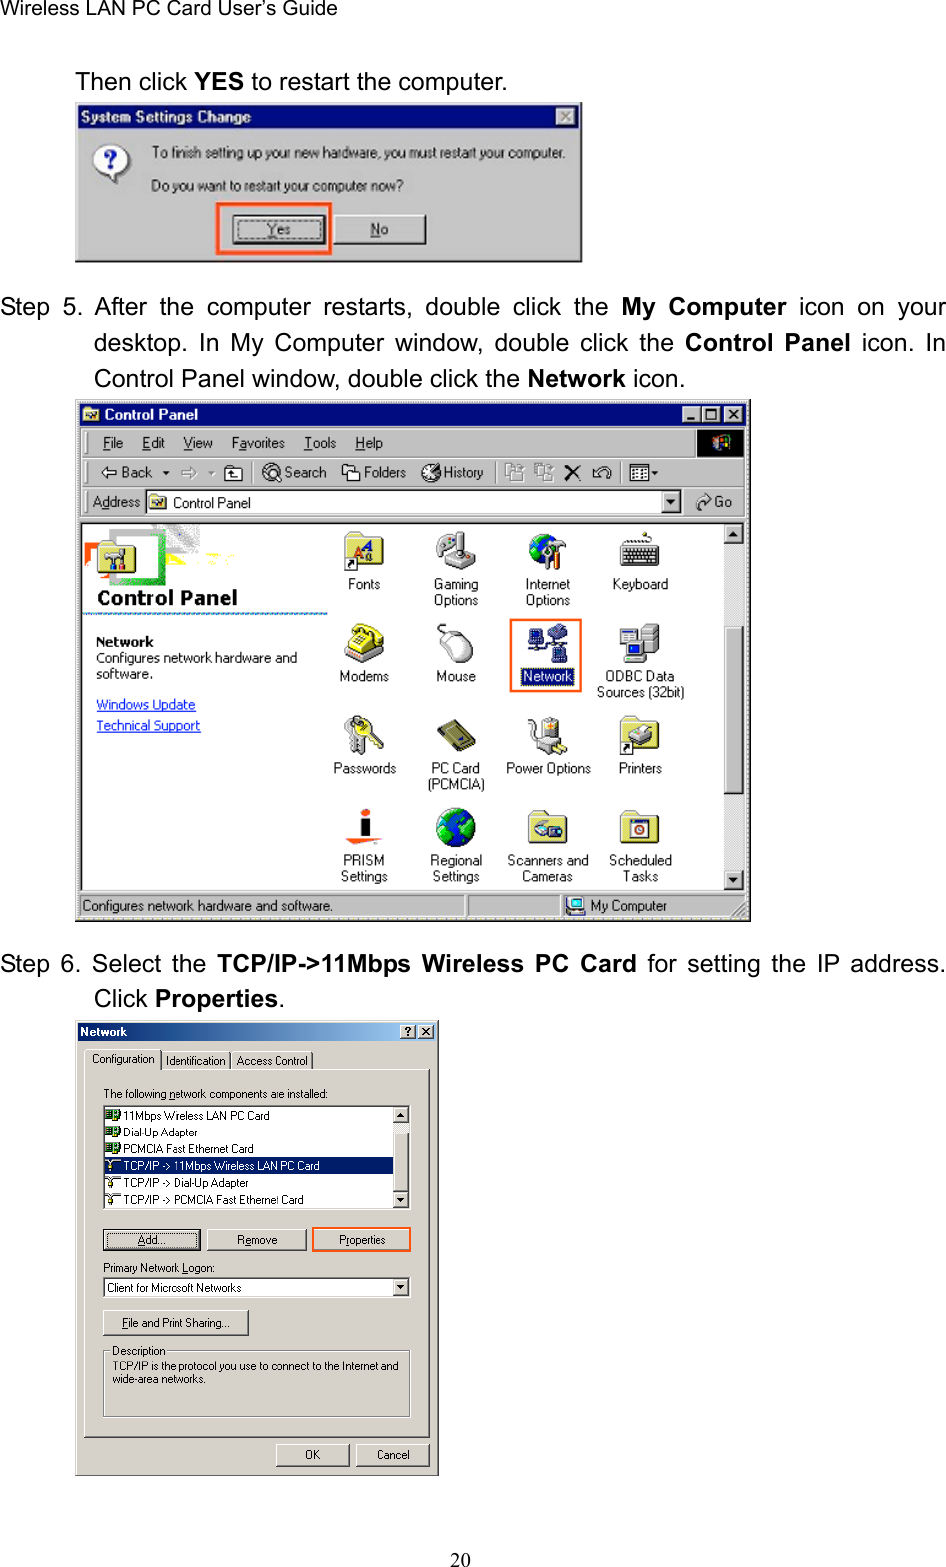 Wireless LAN PC Card User’s Guide20Then click YES to restart the computer.Step 5. After the computer restarts, double click the My Computer icon on yourdesktop. In My Computer window, double click the Control Panel icon. InControl Panel window, double click the Network icon.Step 6. Select the TCP/IP-&gt;11Mbps Wireless PC Card for setting the IP address.Click Properties.